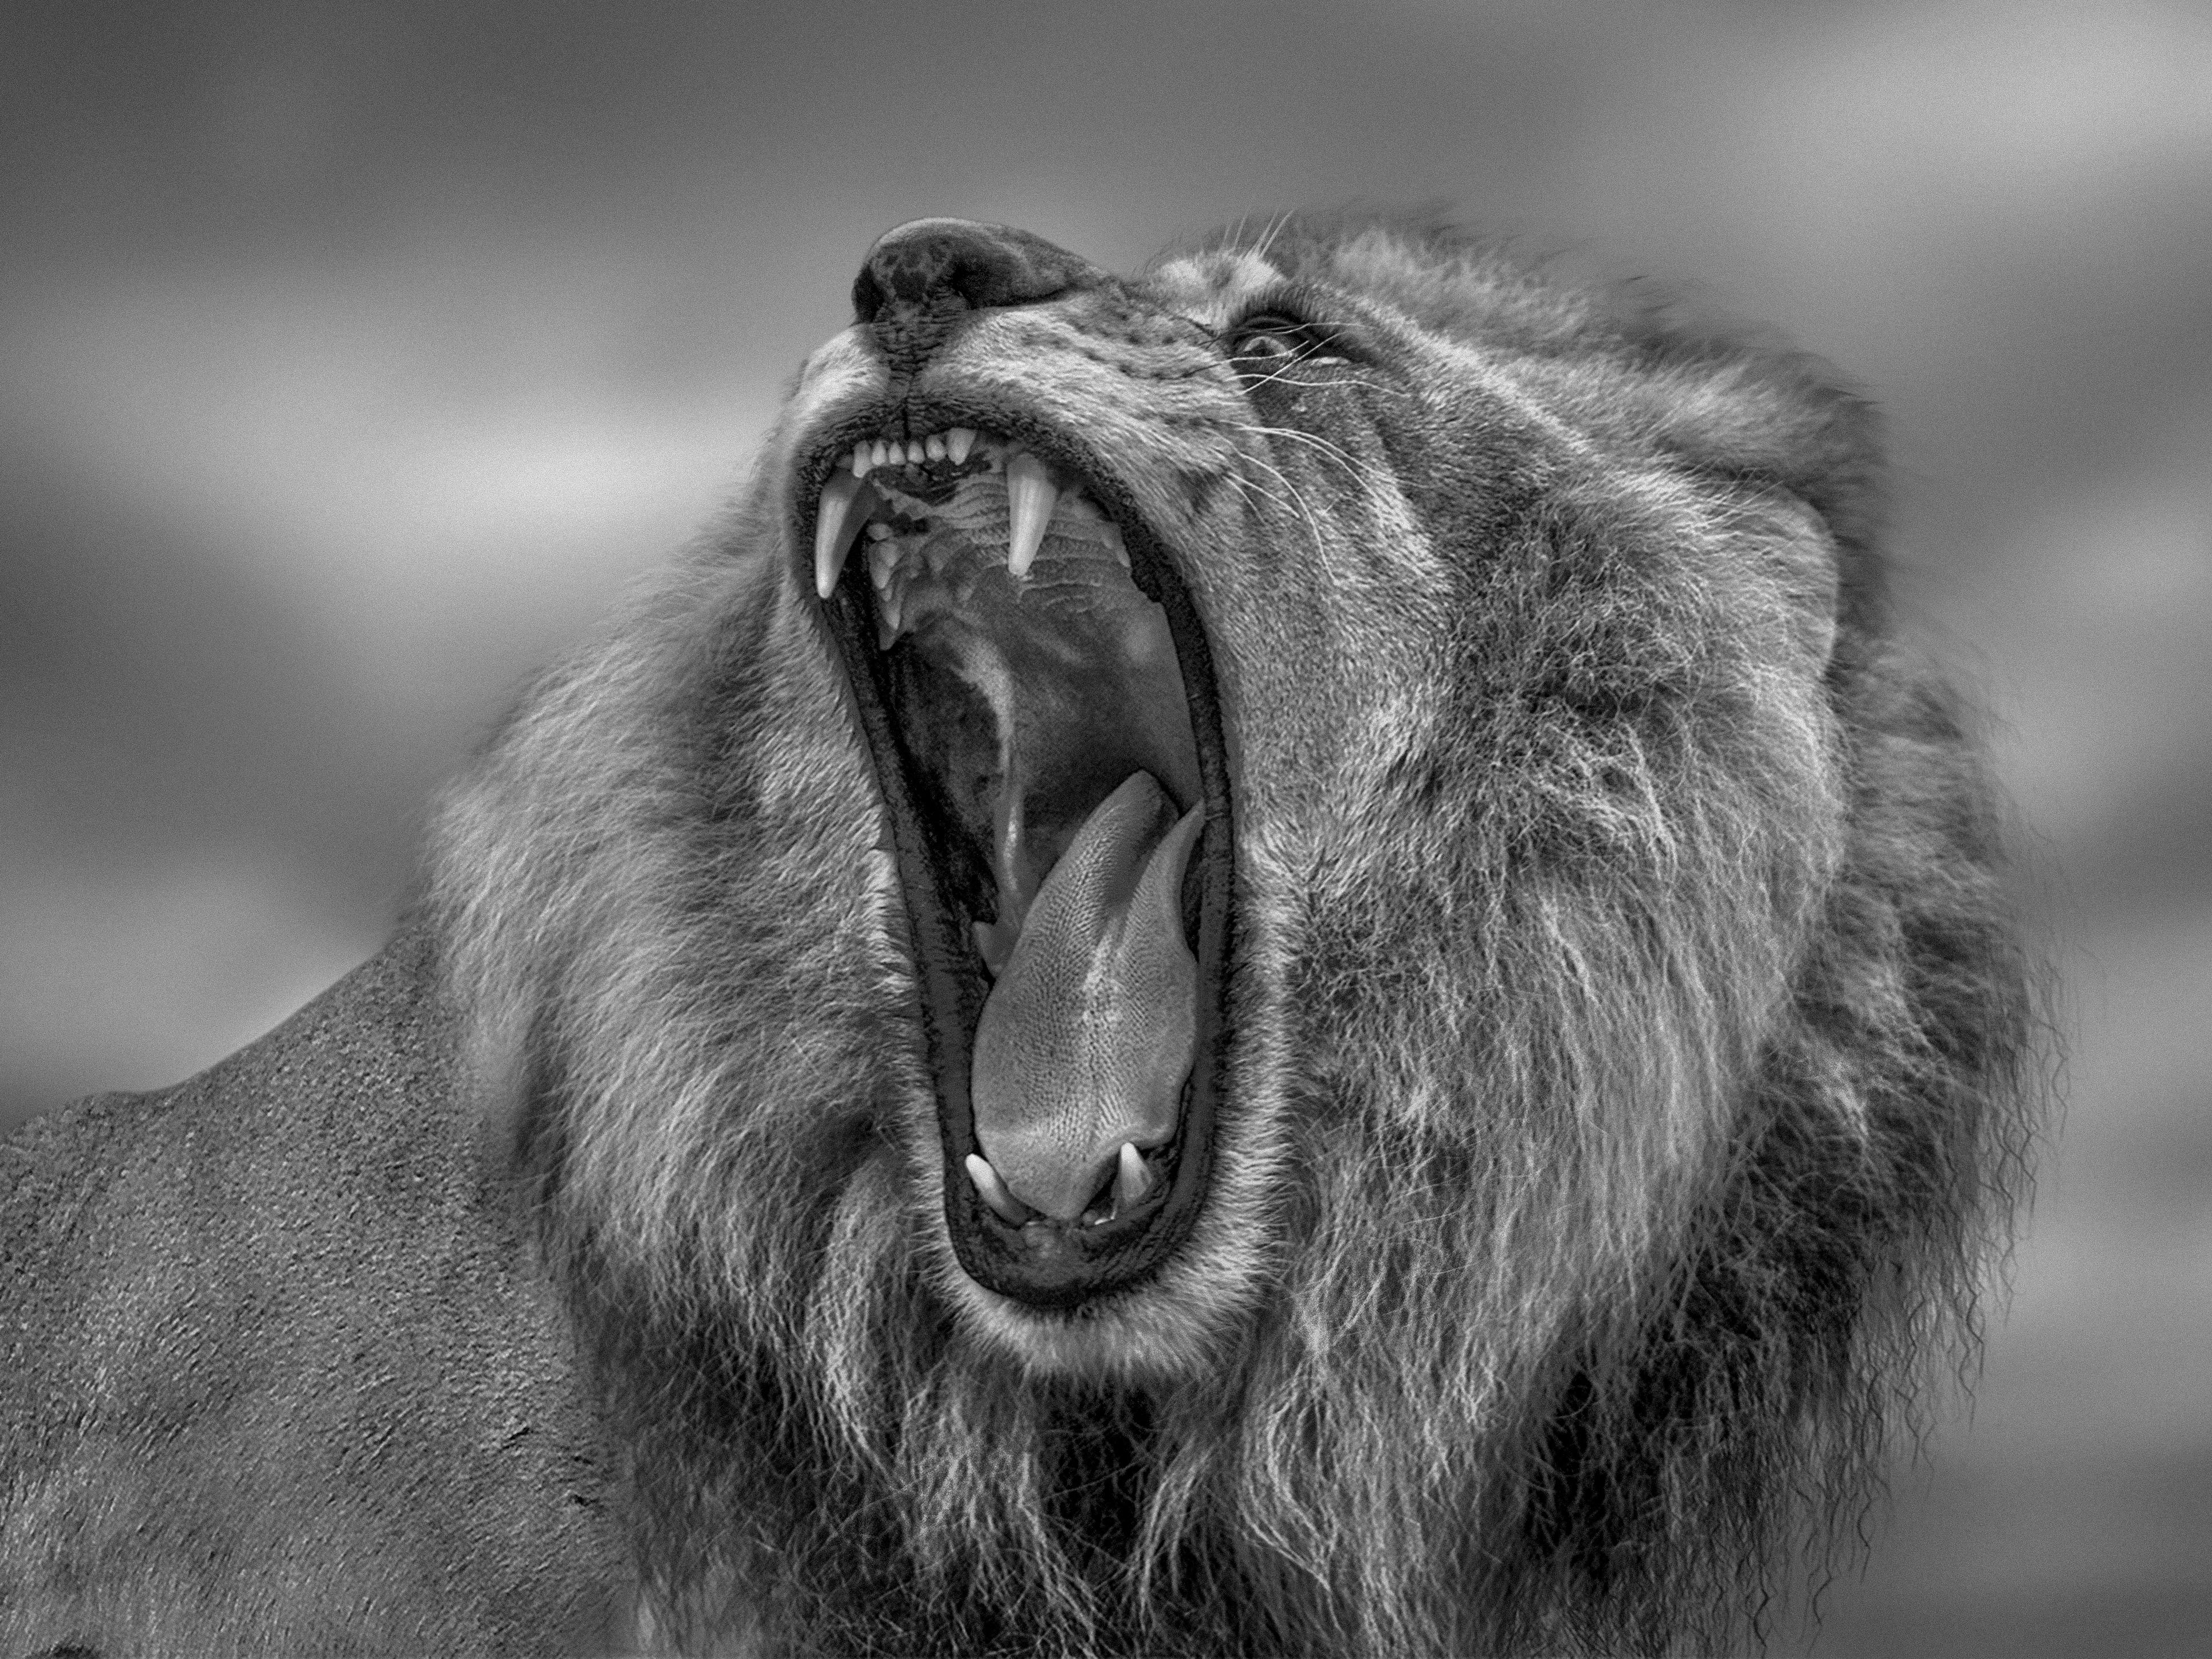 Black and White Photograph Shane Russeck - "Roar" - 36x48 Black and White Lion Photography , Africa, Lion Photograph